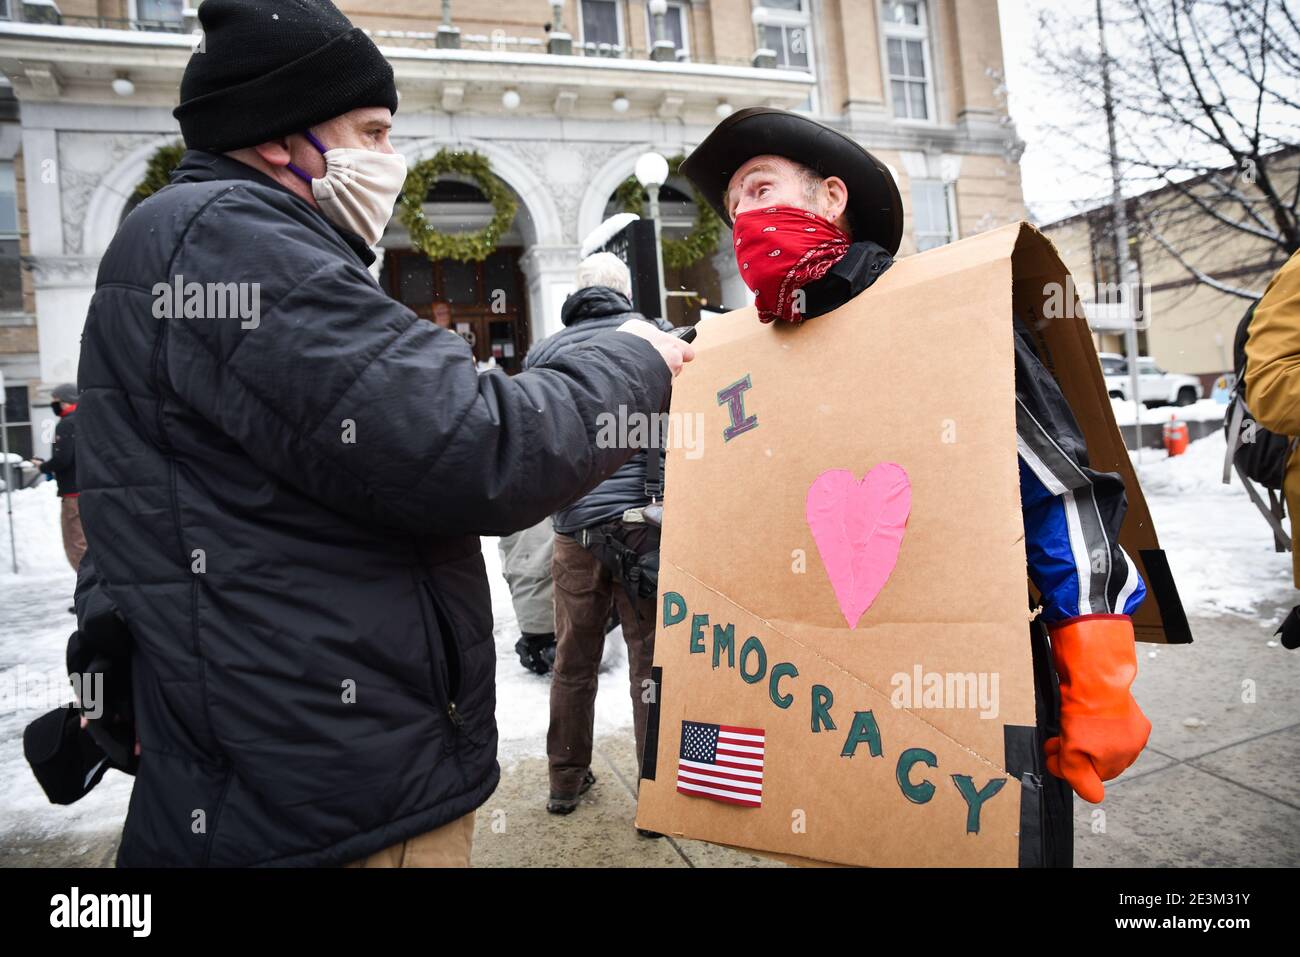 Demonstrators against fascism in USA at Montpelier, VT, USA, city hall after Jan. 6, 2021 attack on US Capitol. Stock Photo